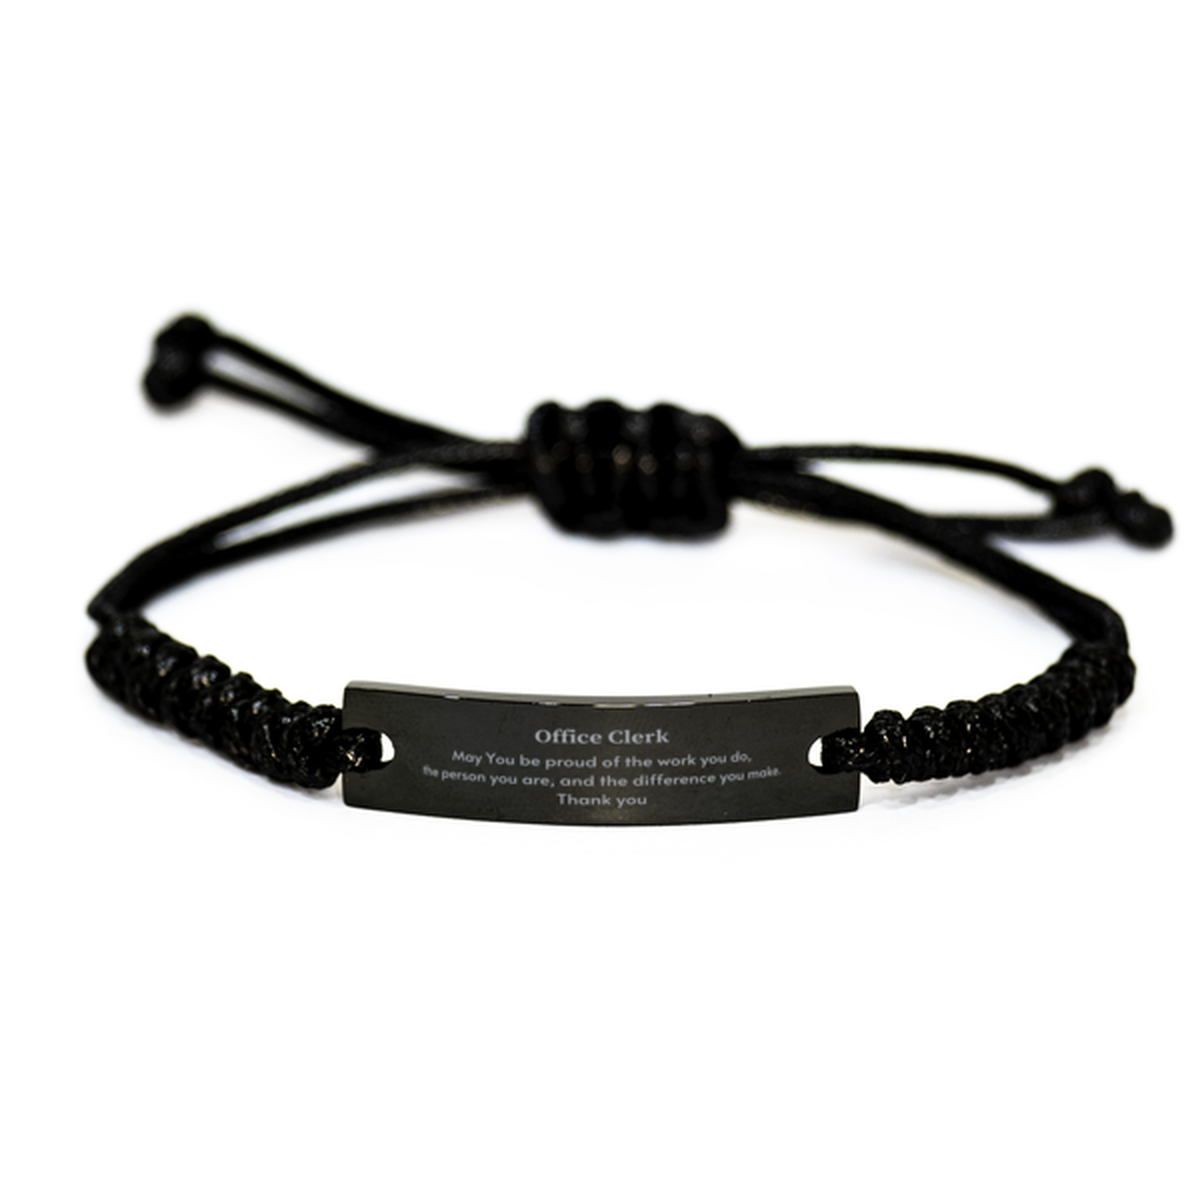 Heartwarming Black Rope Bracelet Retirement Coworkers Gifts for Office Clerk, Office Clerk May You be proud of the work you do, the person you are Gifts for Boss Men Women Friends